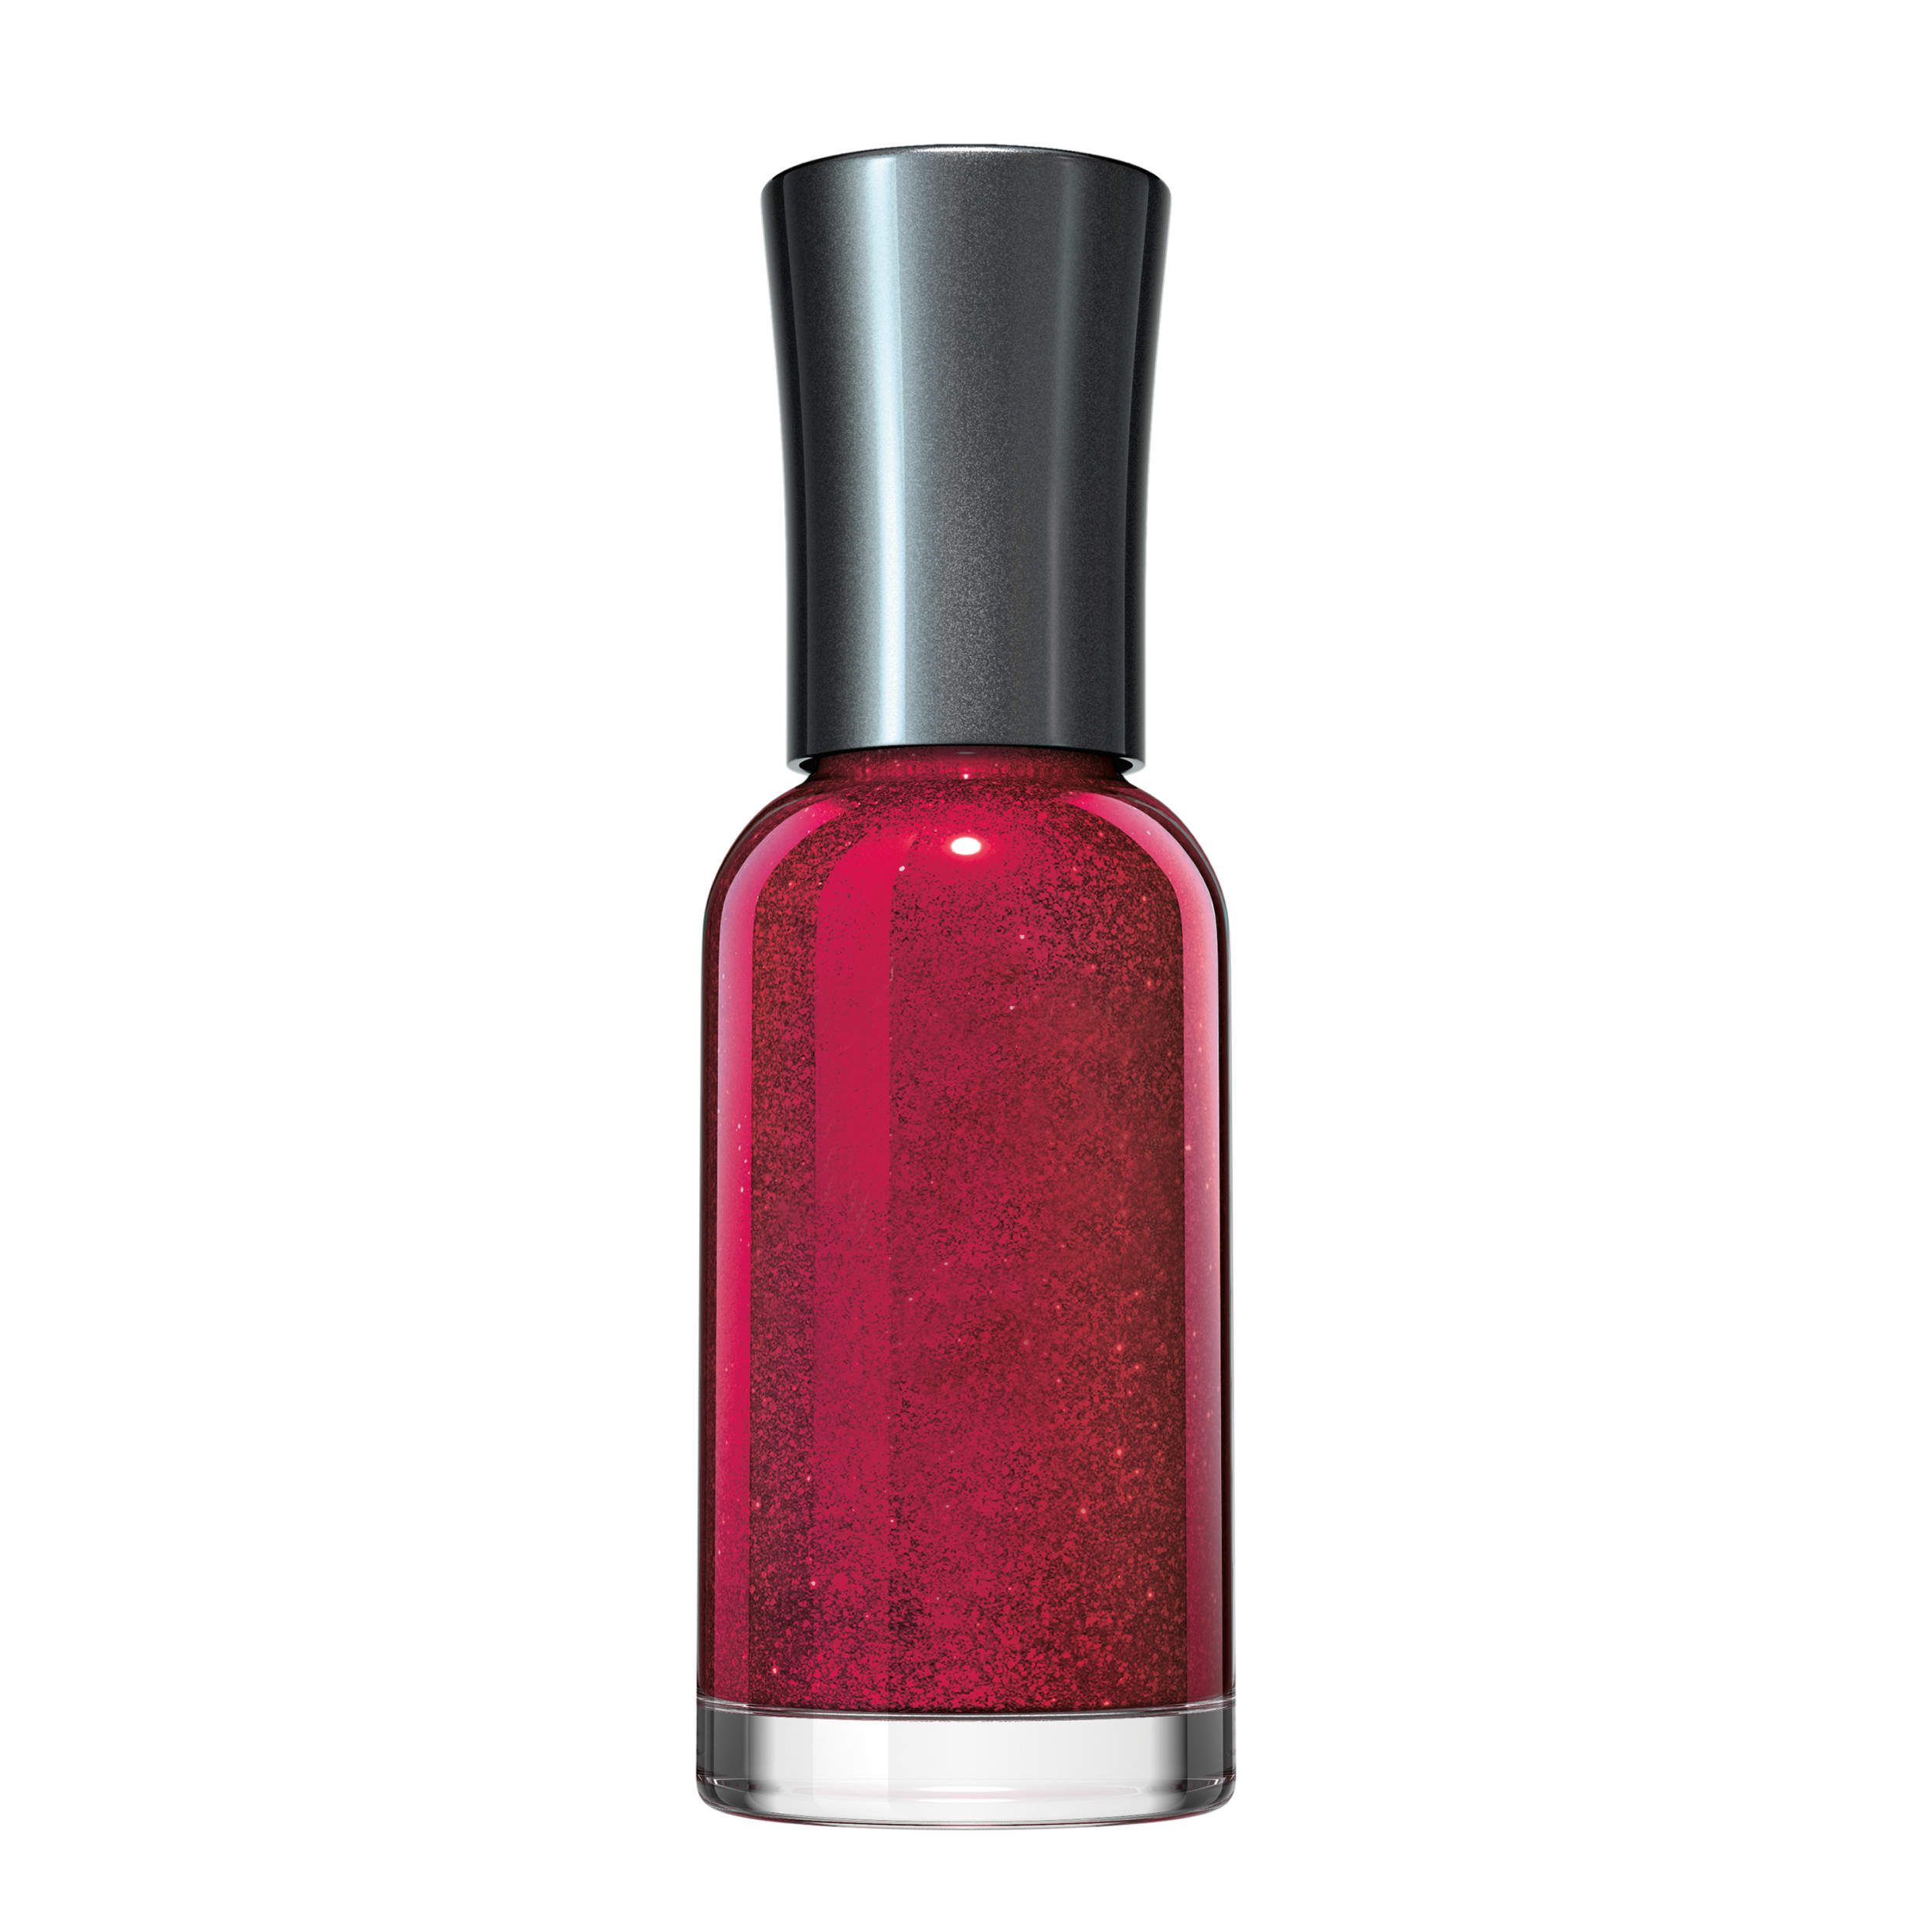 Sally Hansen Xtreme Wear Nail Polish, Red Carpet, 0.4 oz, Chip Resistant, Bold Color - image 9 of 14